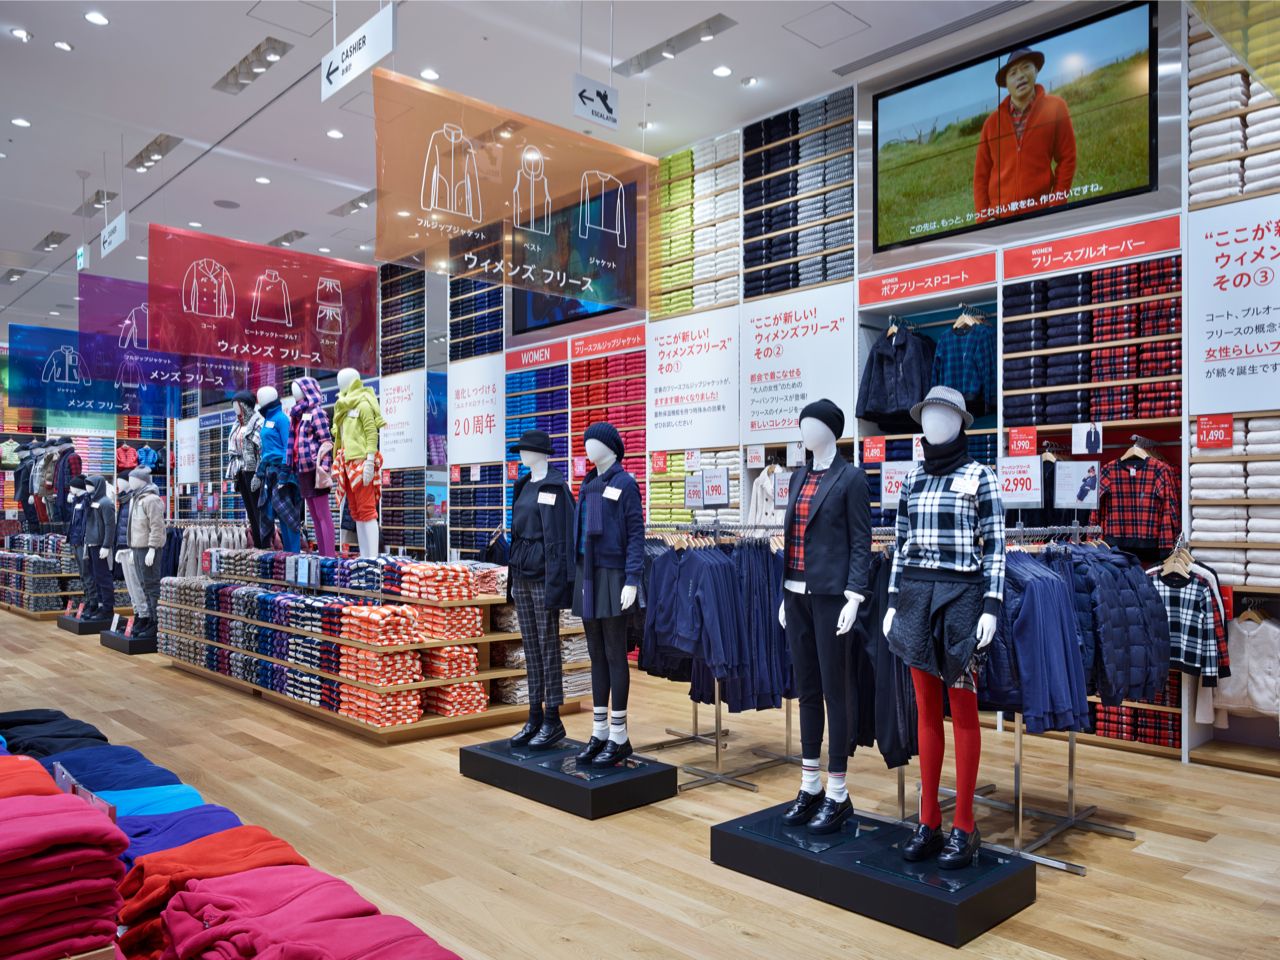 UNIQLO opens in downtown HCM City